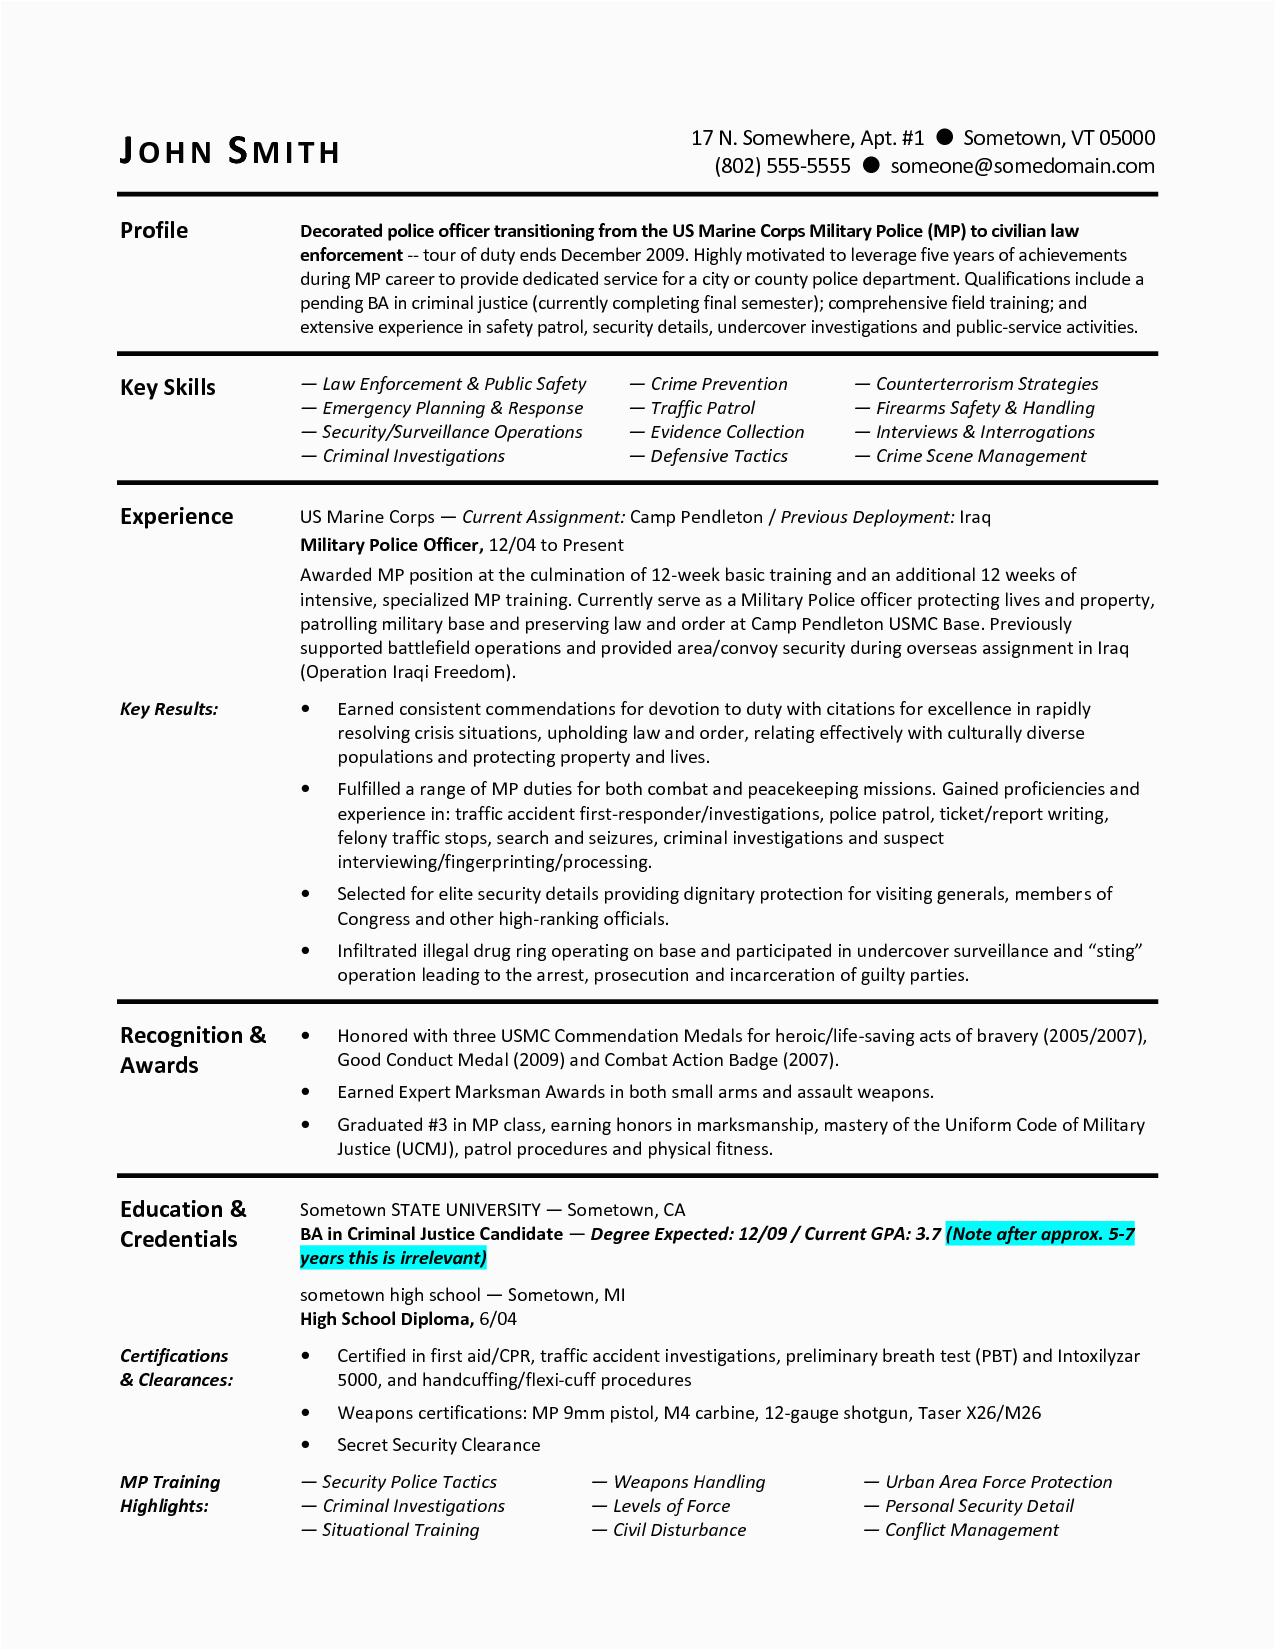 Sample Military to Civilian Transition Resume Military to Civilian Resumes